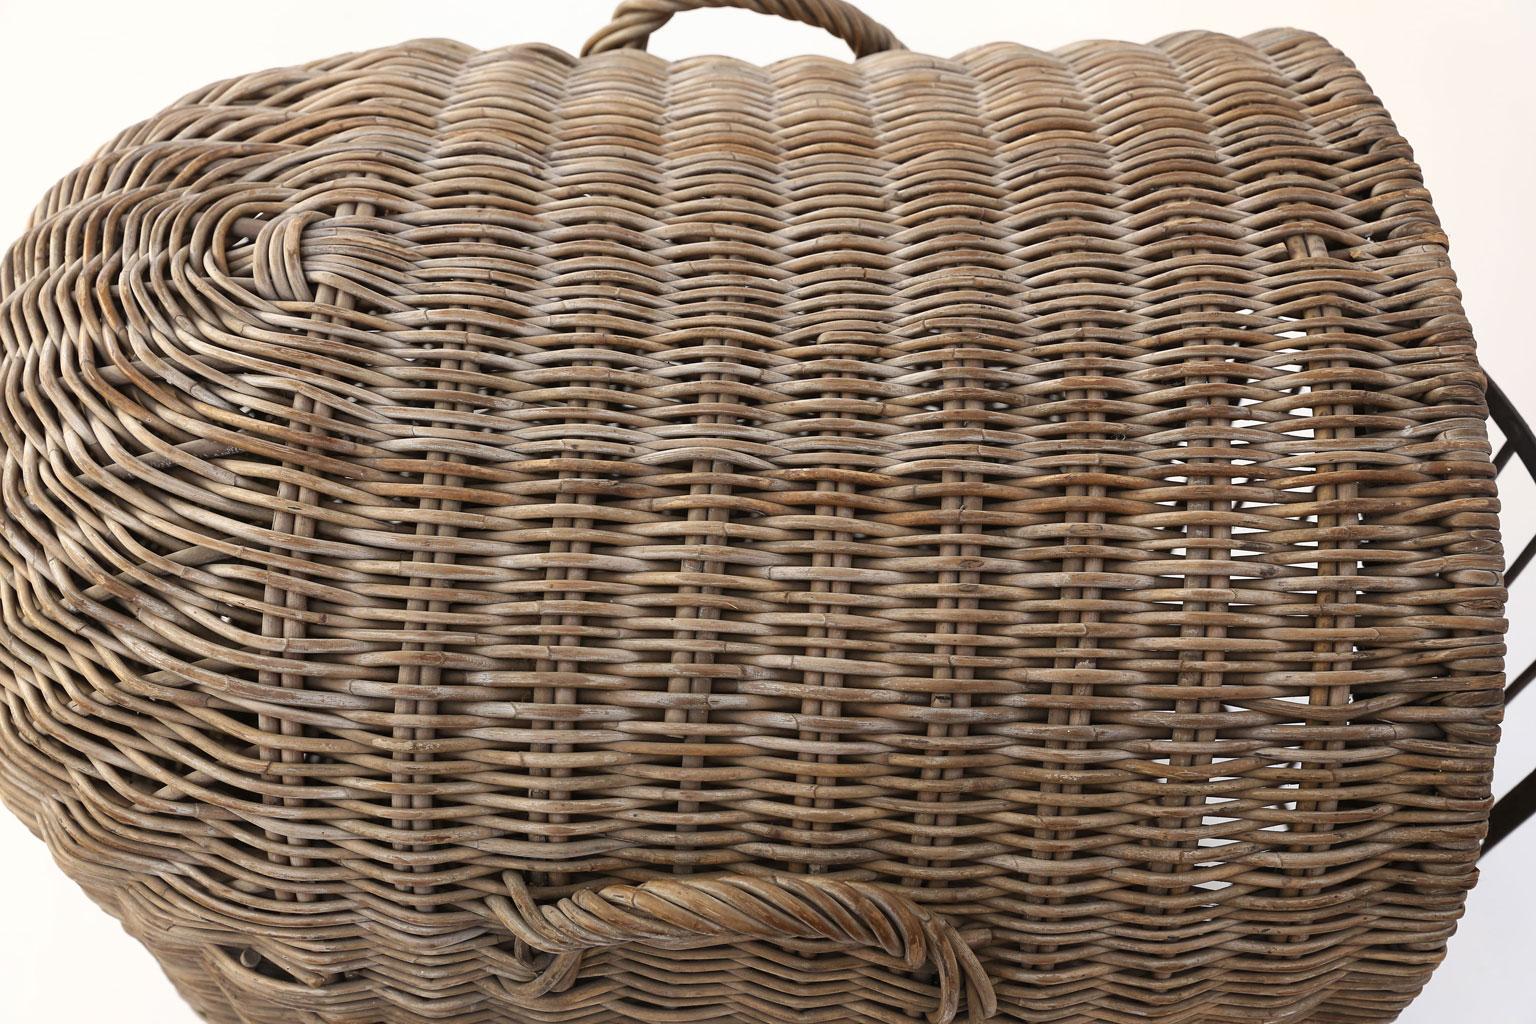 English Brown Wicker Dog Kennel Basket In Fair Condition For Sale In Houston, TX